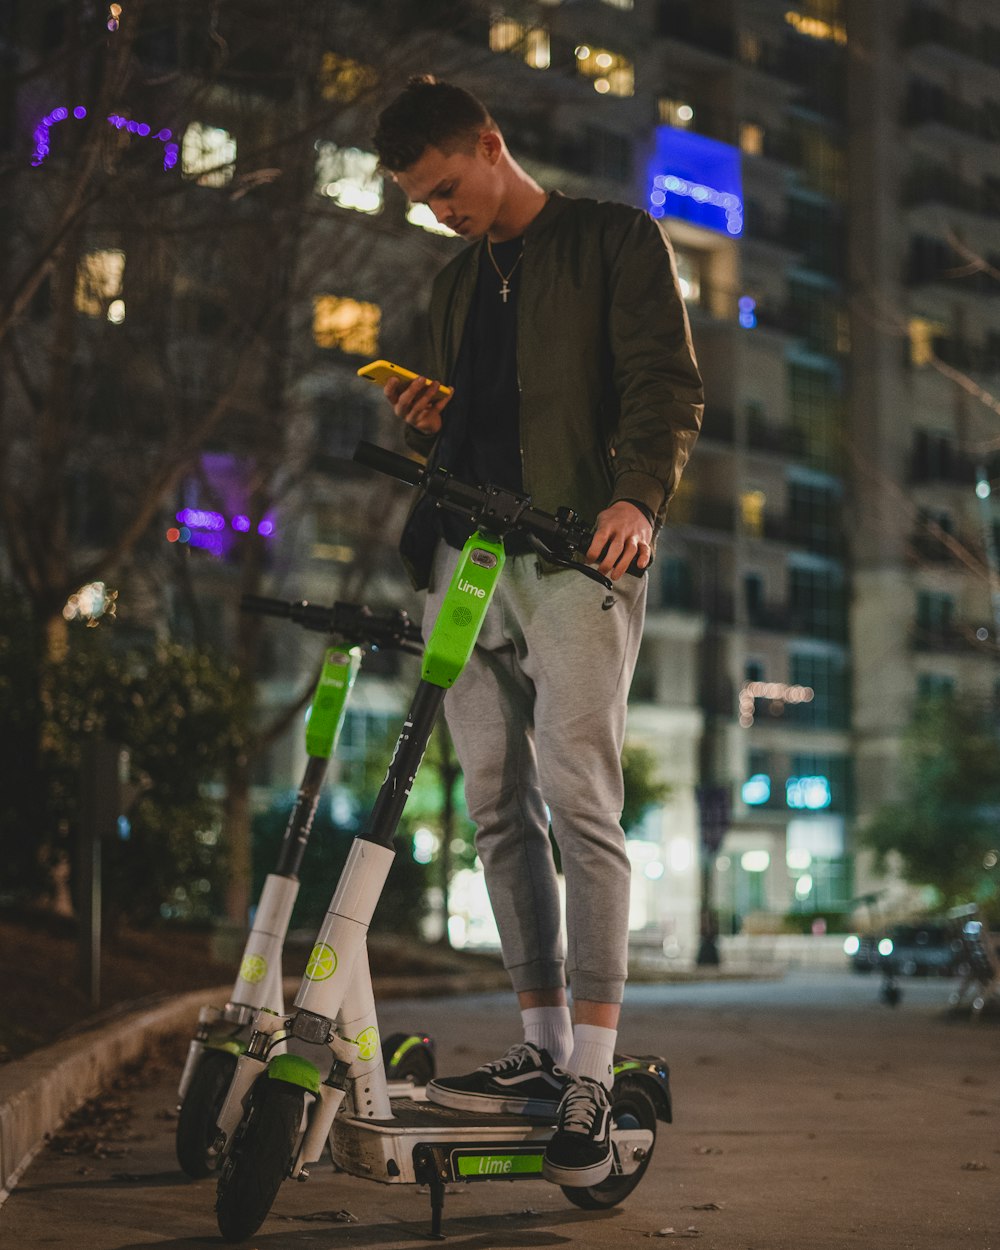 man standing on white, green, and black electric scooter during nighttime